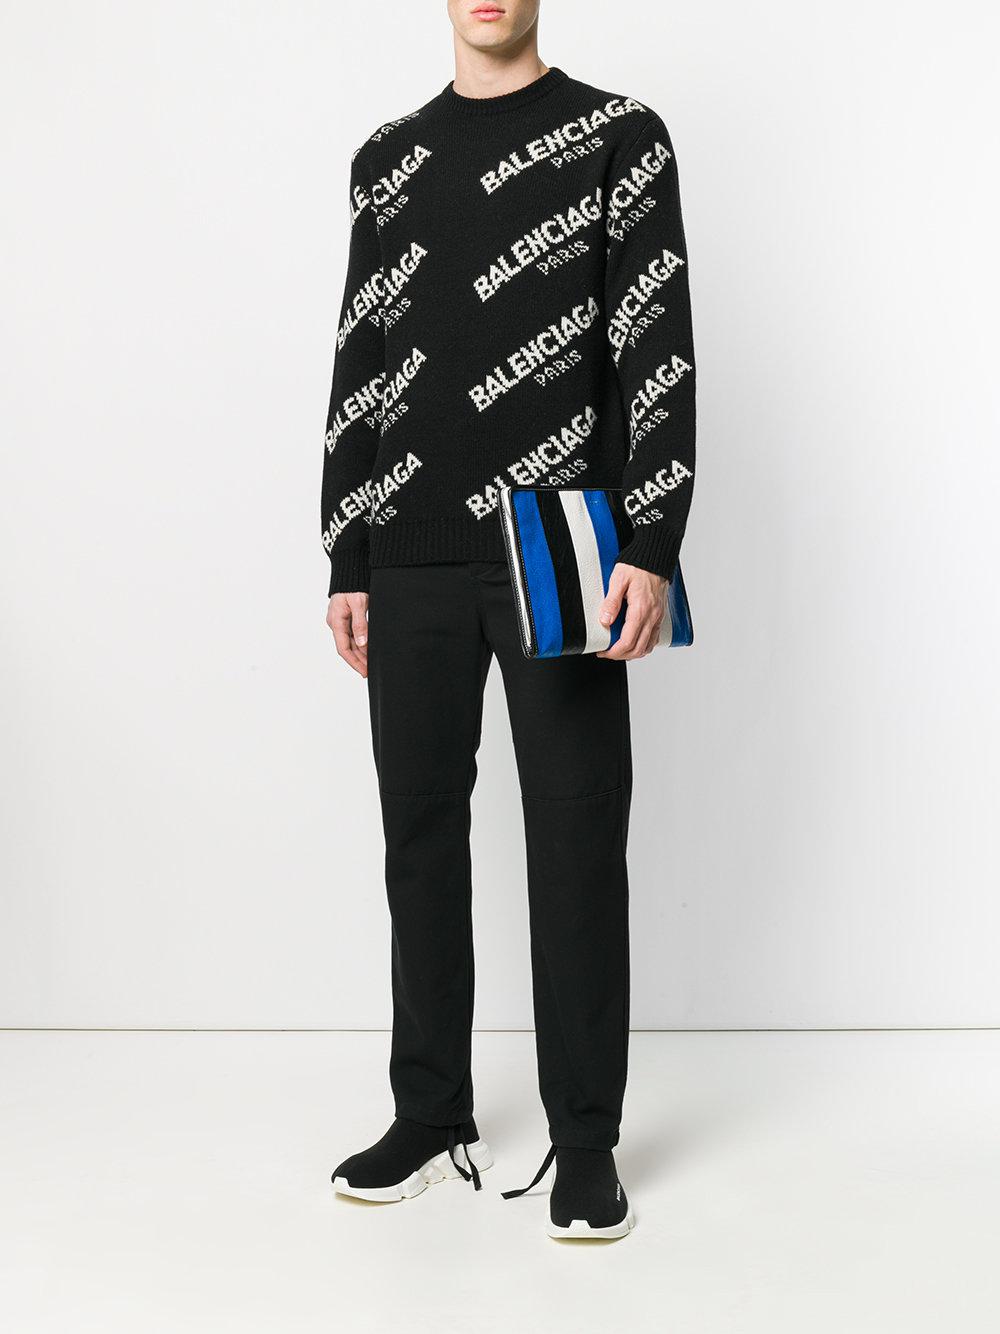 Balenciaga Wool All Over Sweater in Black for Men | Lyst